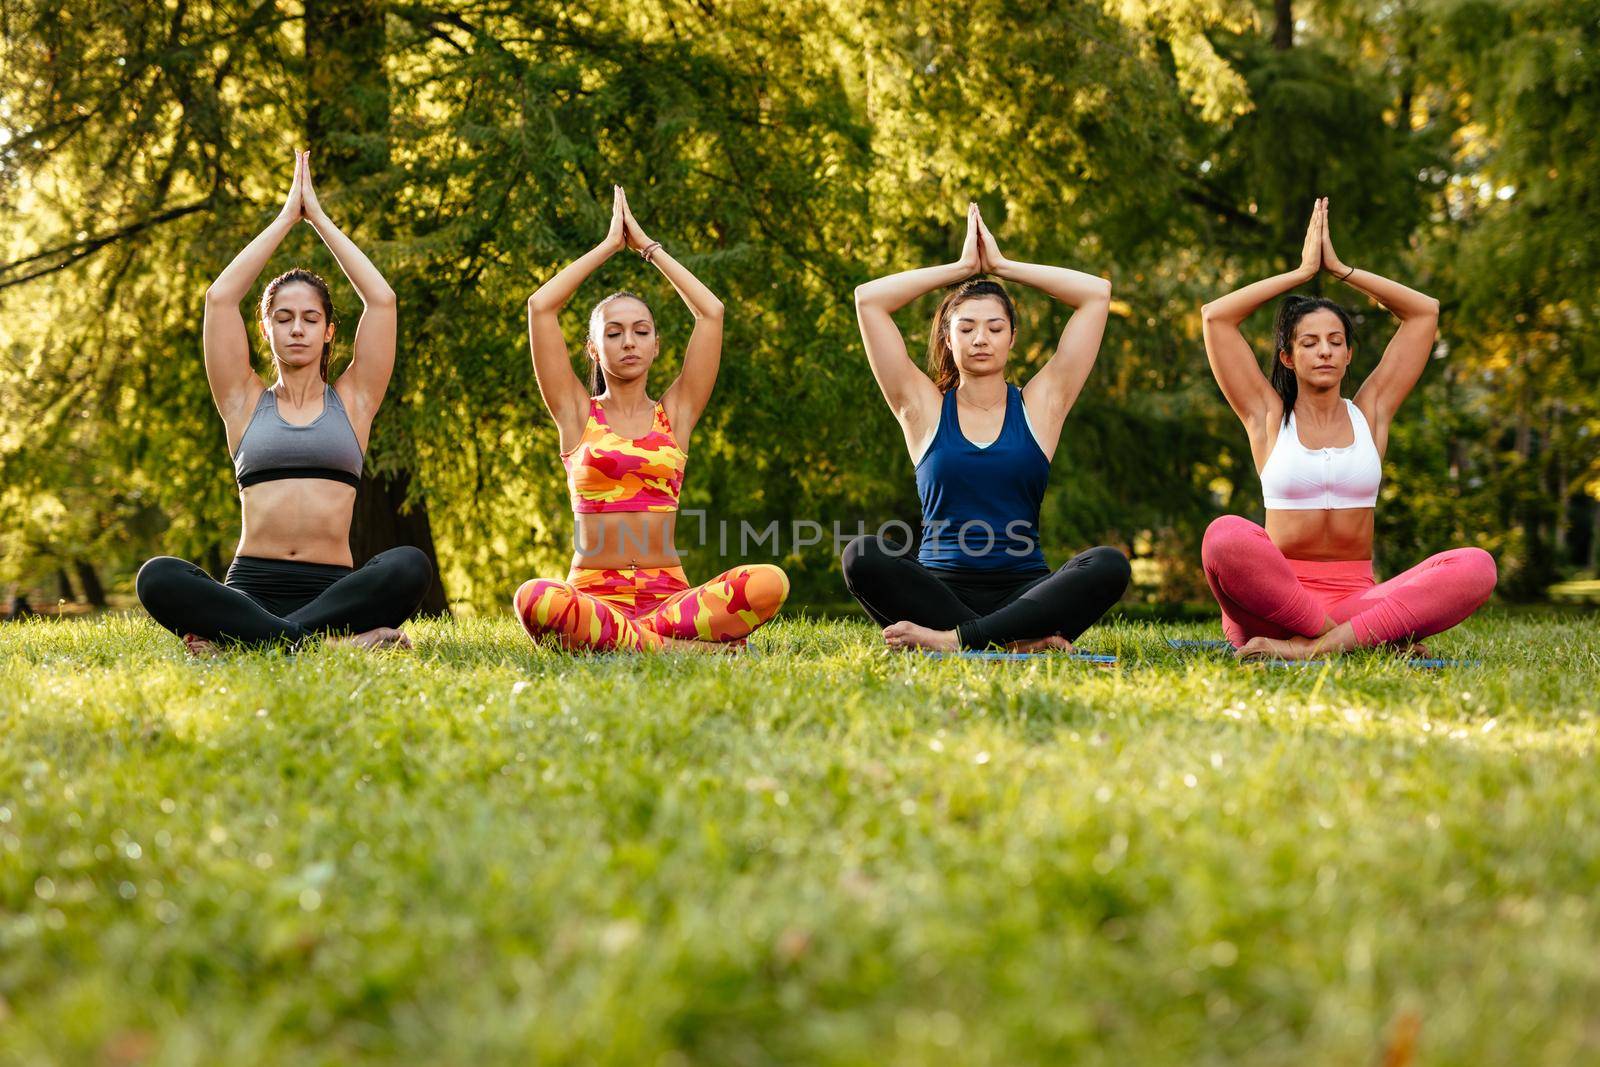 Yoga In The Park by MilanMarkovic78